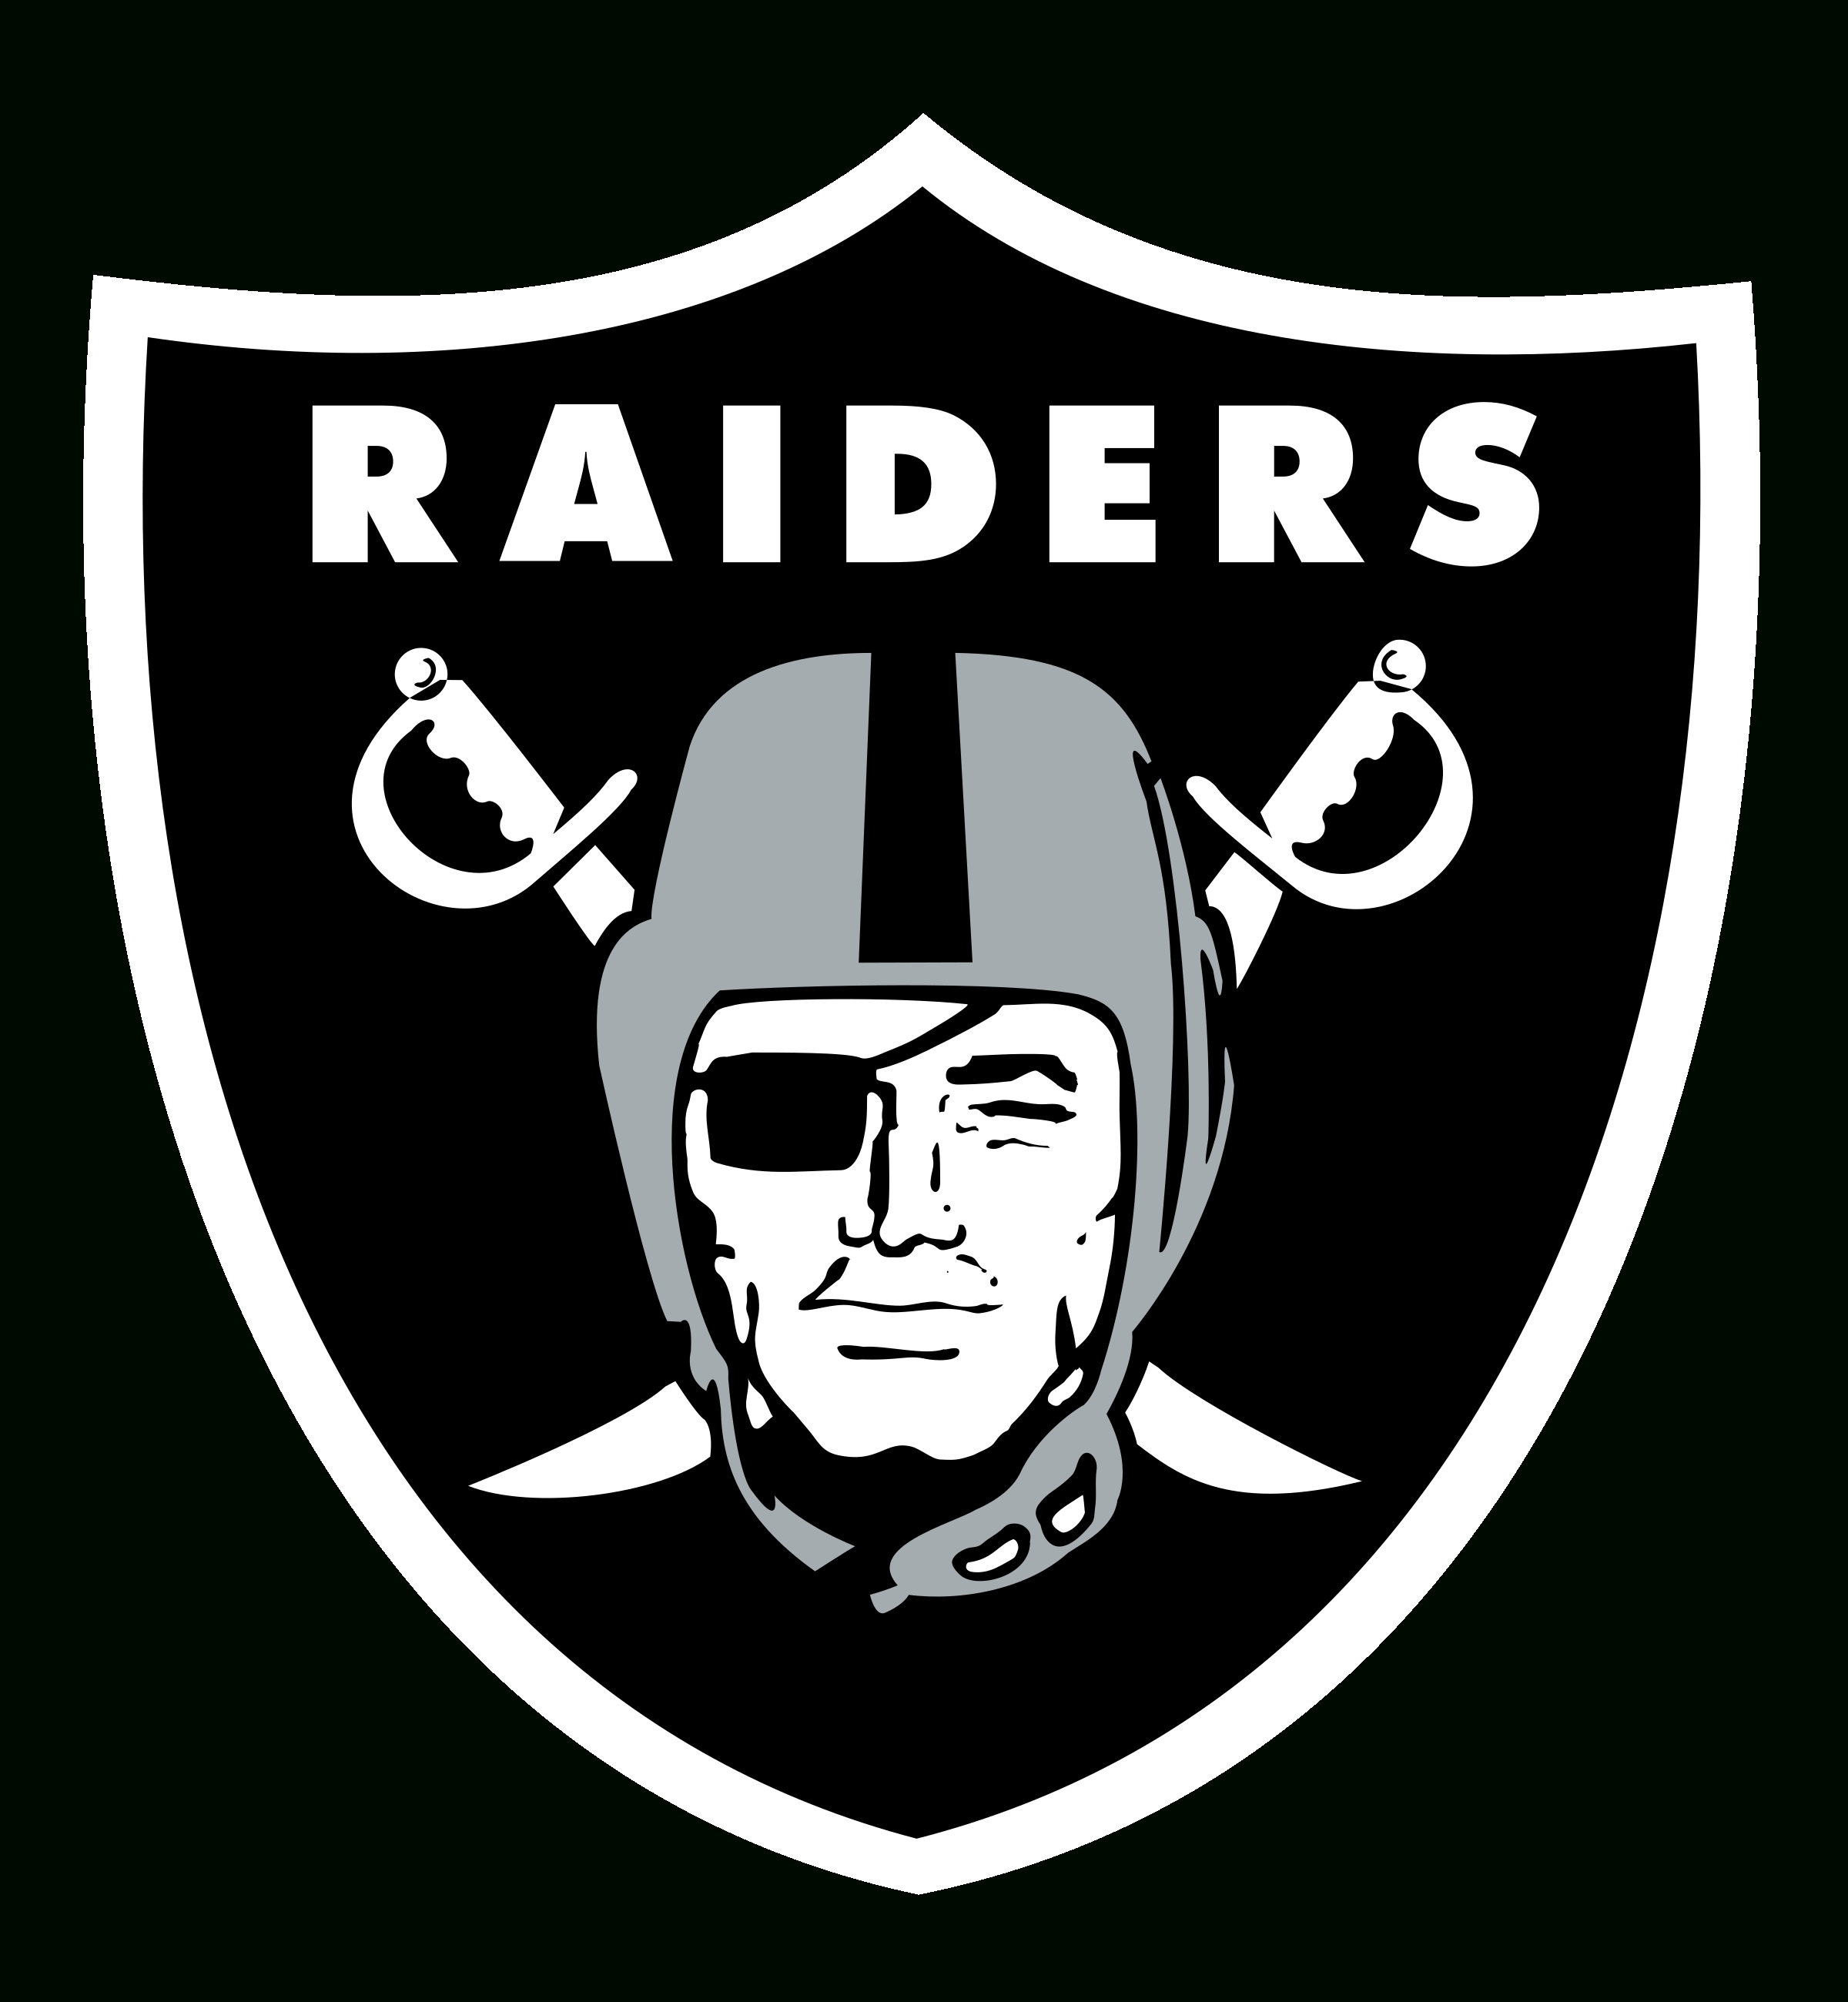 10 Top Oakland Raiders Logos Images FULL HD 1080p For PC Background 2020